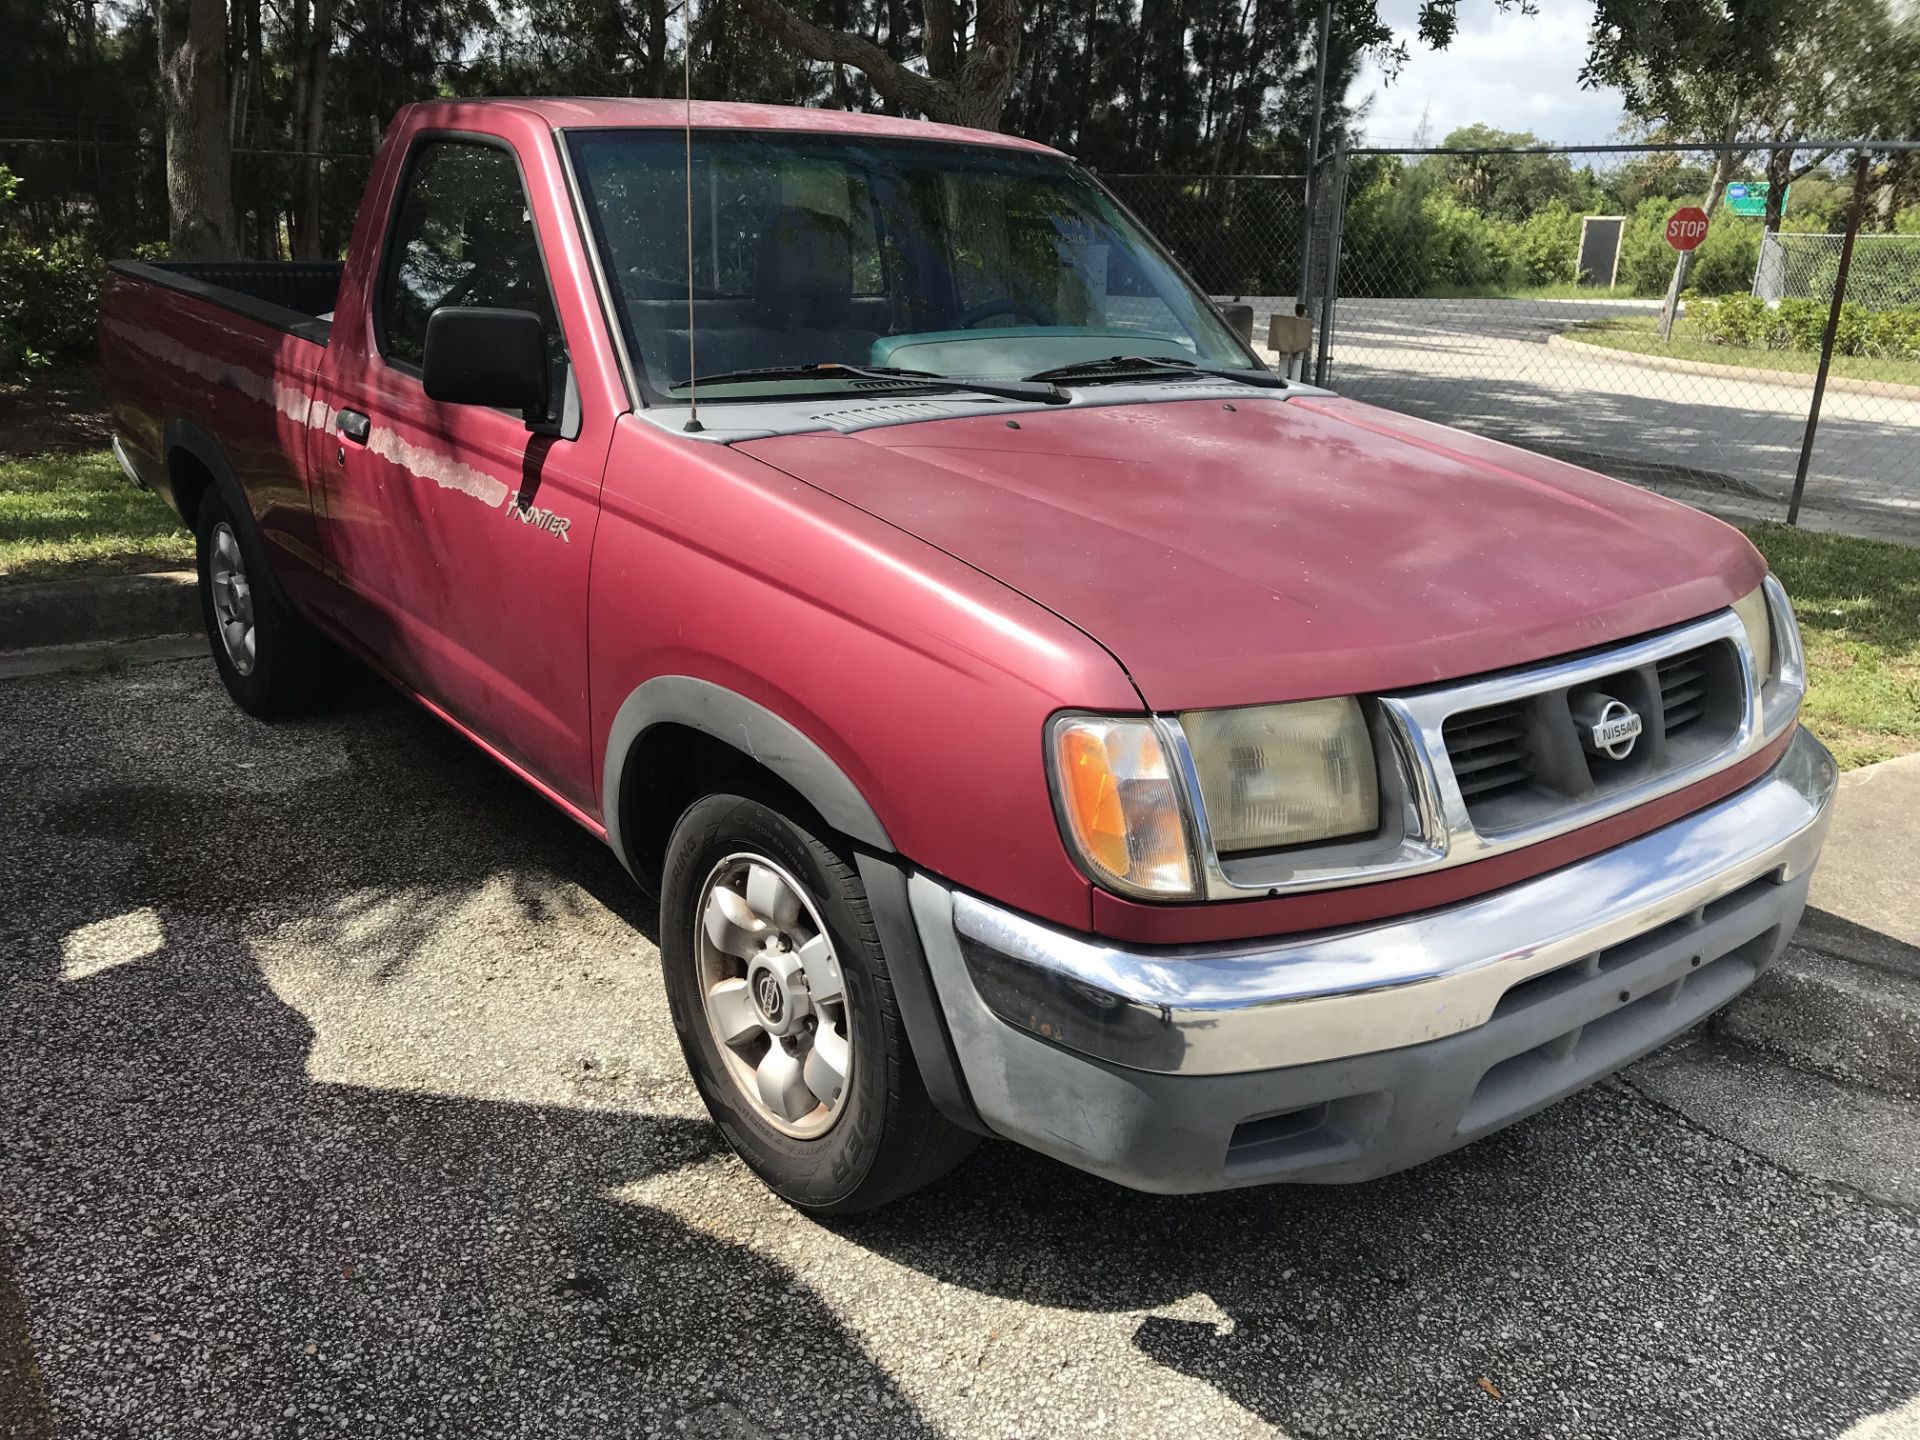 1998 NISSAN FRONTIER PICKUP TRUCK; VIN # 1N6DD21SXWC341007, MANUAL TRANSMISSION, 79,967 MILES - Image 3 of 6